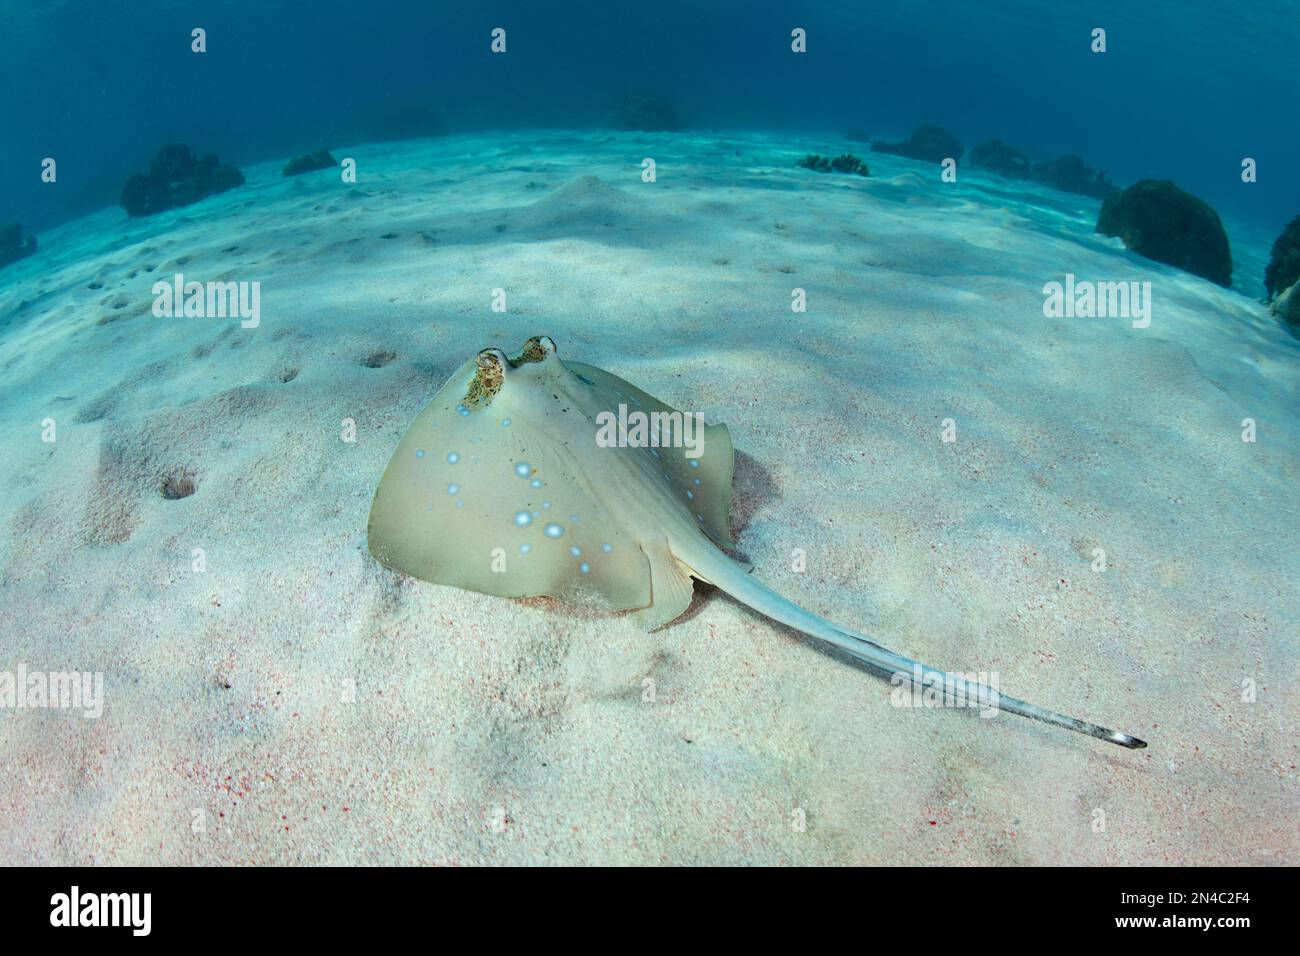 A Blue-spotted stingray, Neotrygon kuhlii, lies on the sandy seafloor in Komodo National Park, Indonesia. This elasmobranch is common on coral reefs. Stock Photo